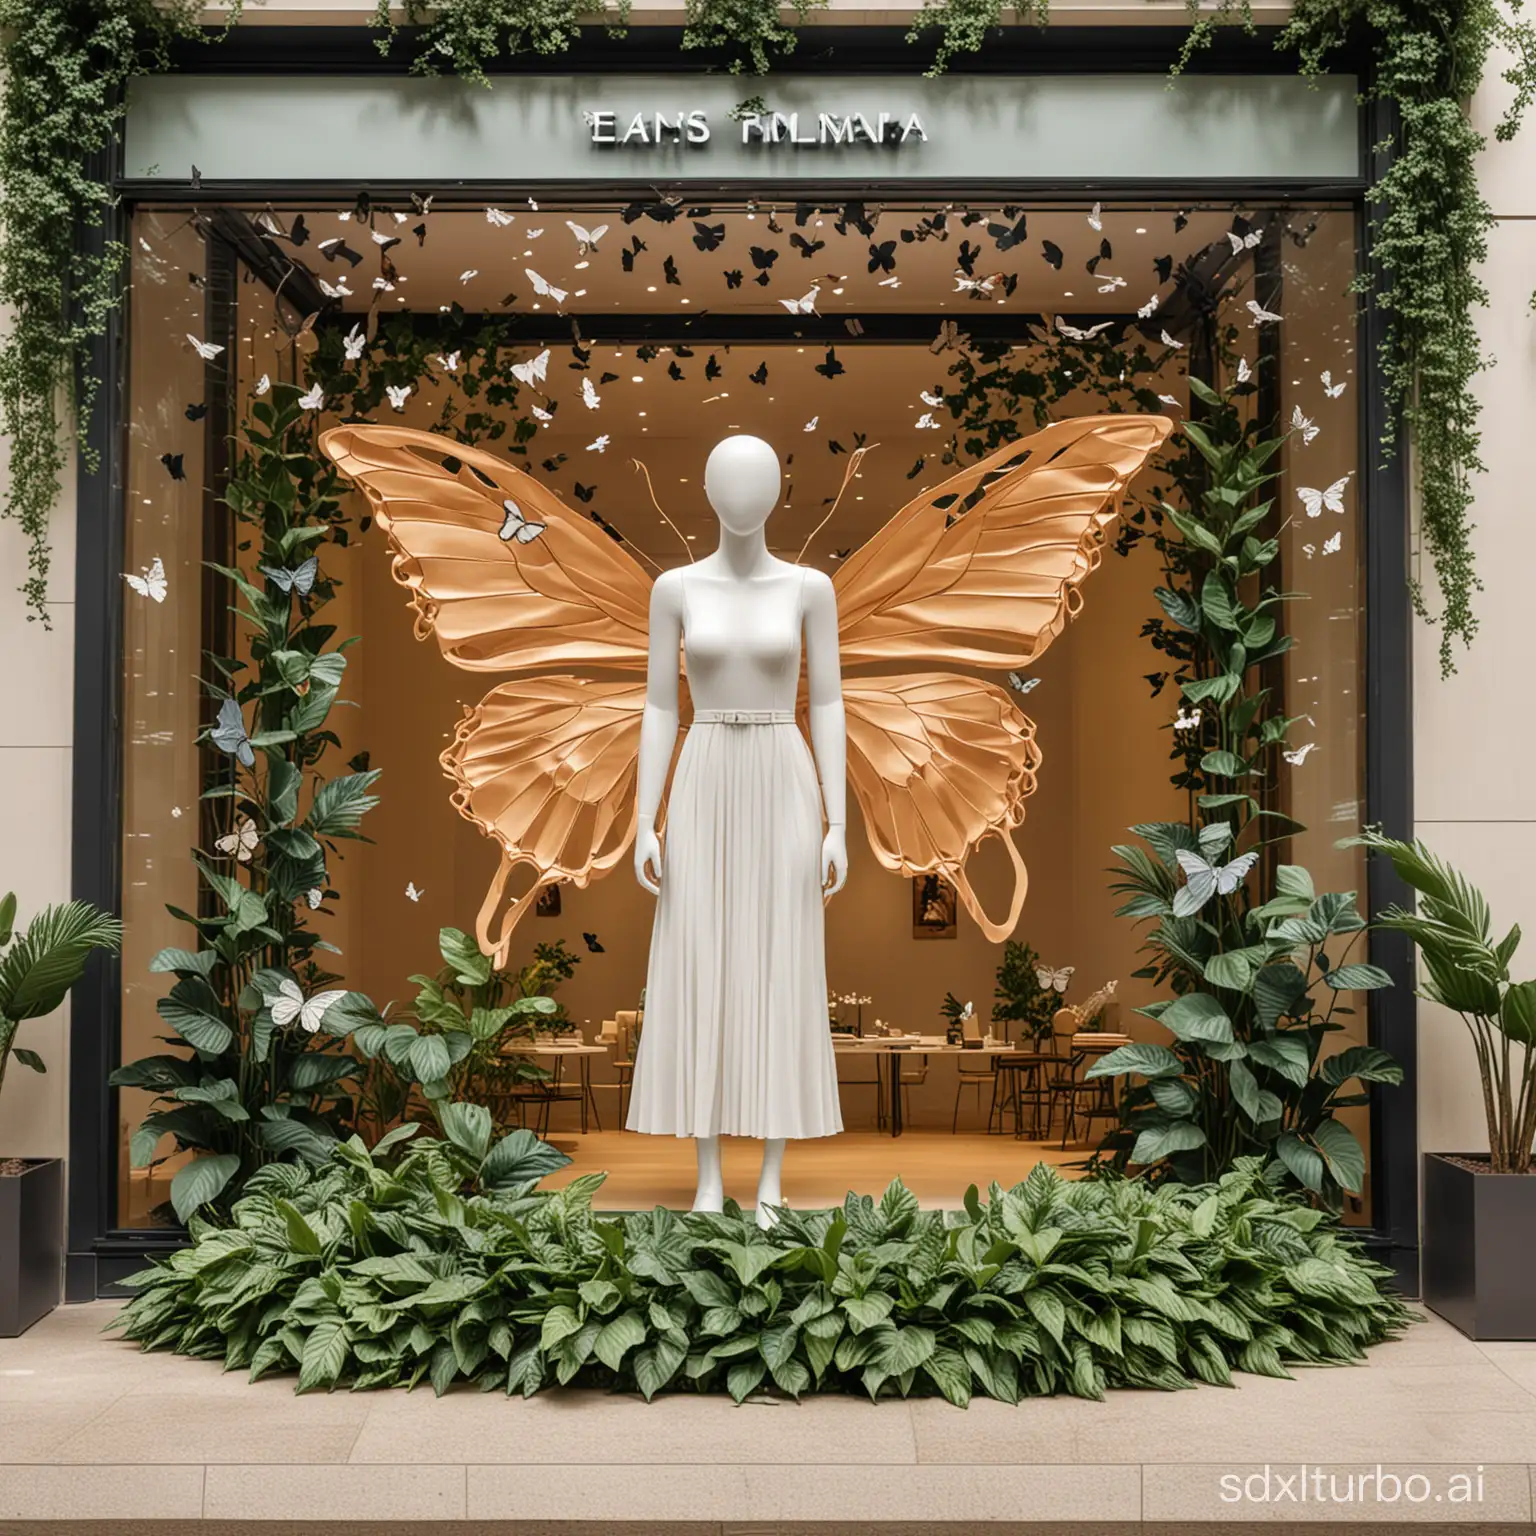 Chic-Womens-Clothing-Boutique-with-Butterfly-Sculpture-Display